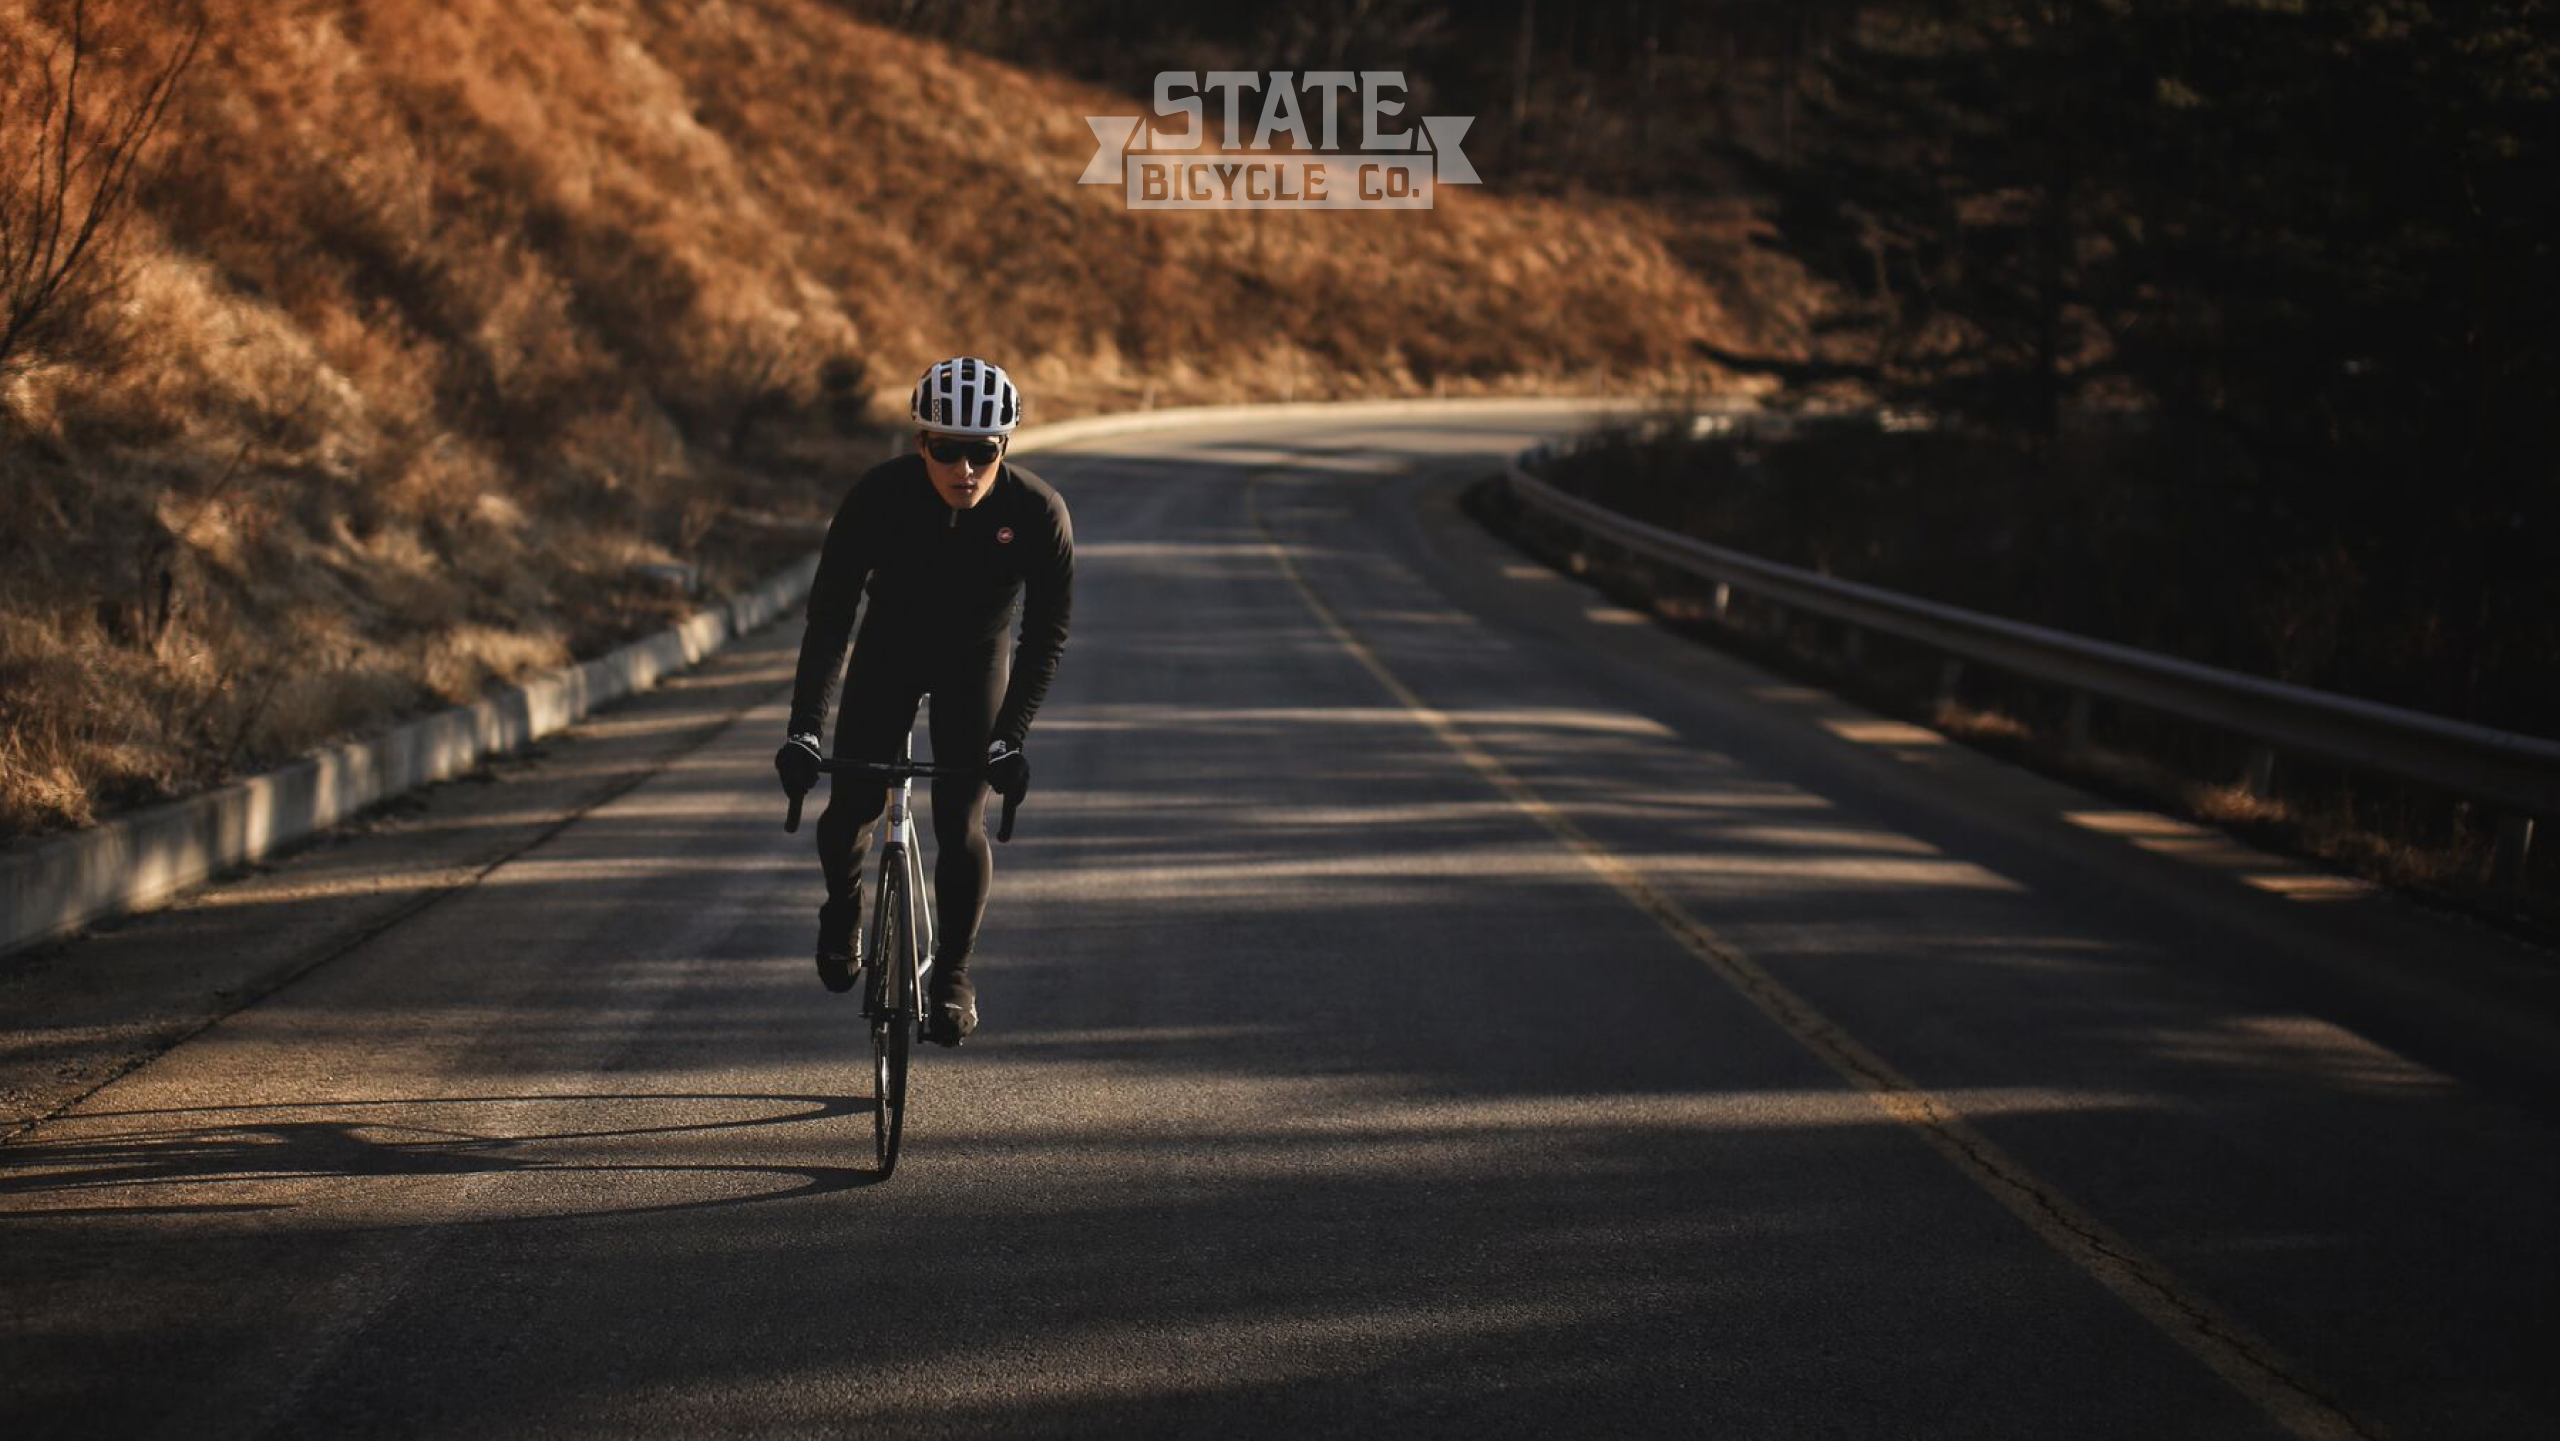 Monthly Wallpaper – November 2015 | State Bicycle Co.